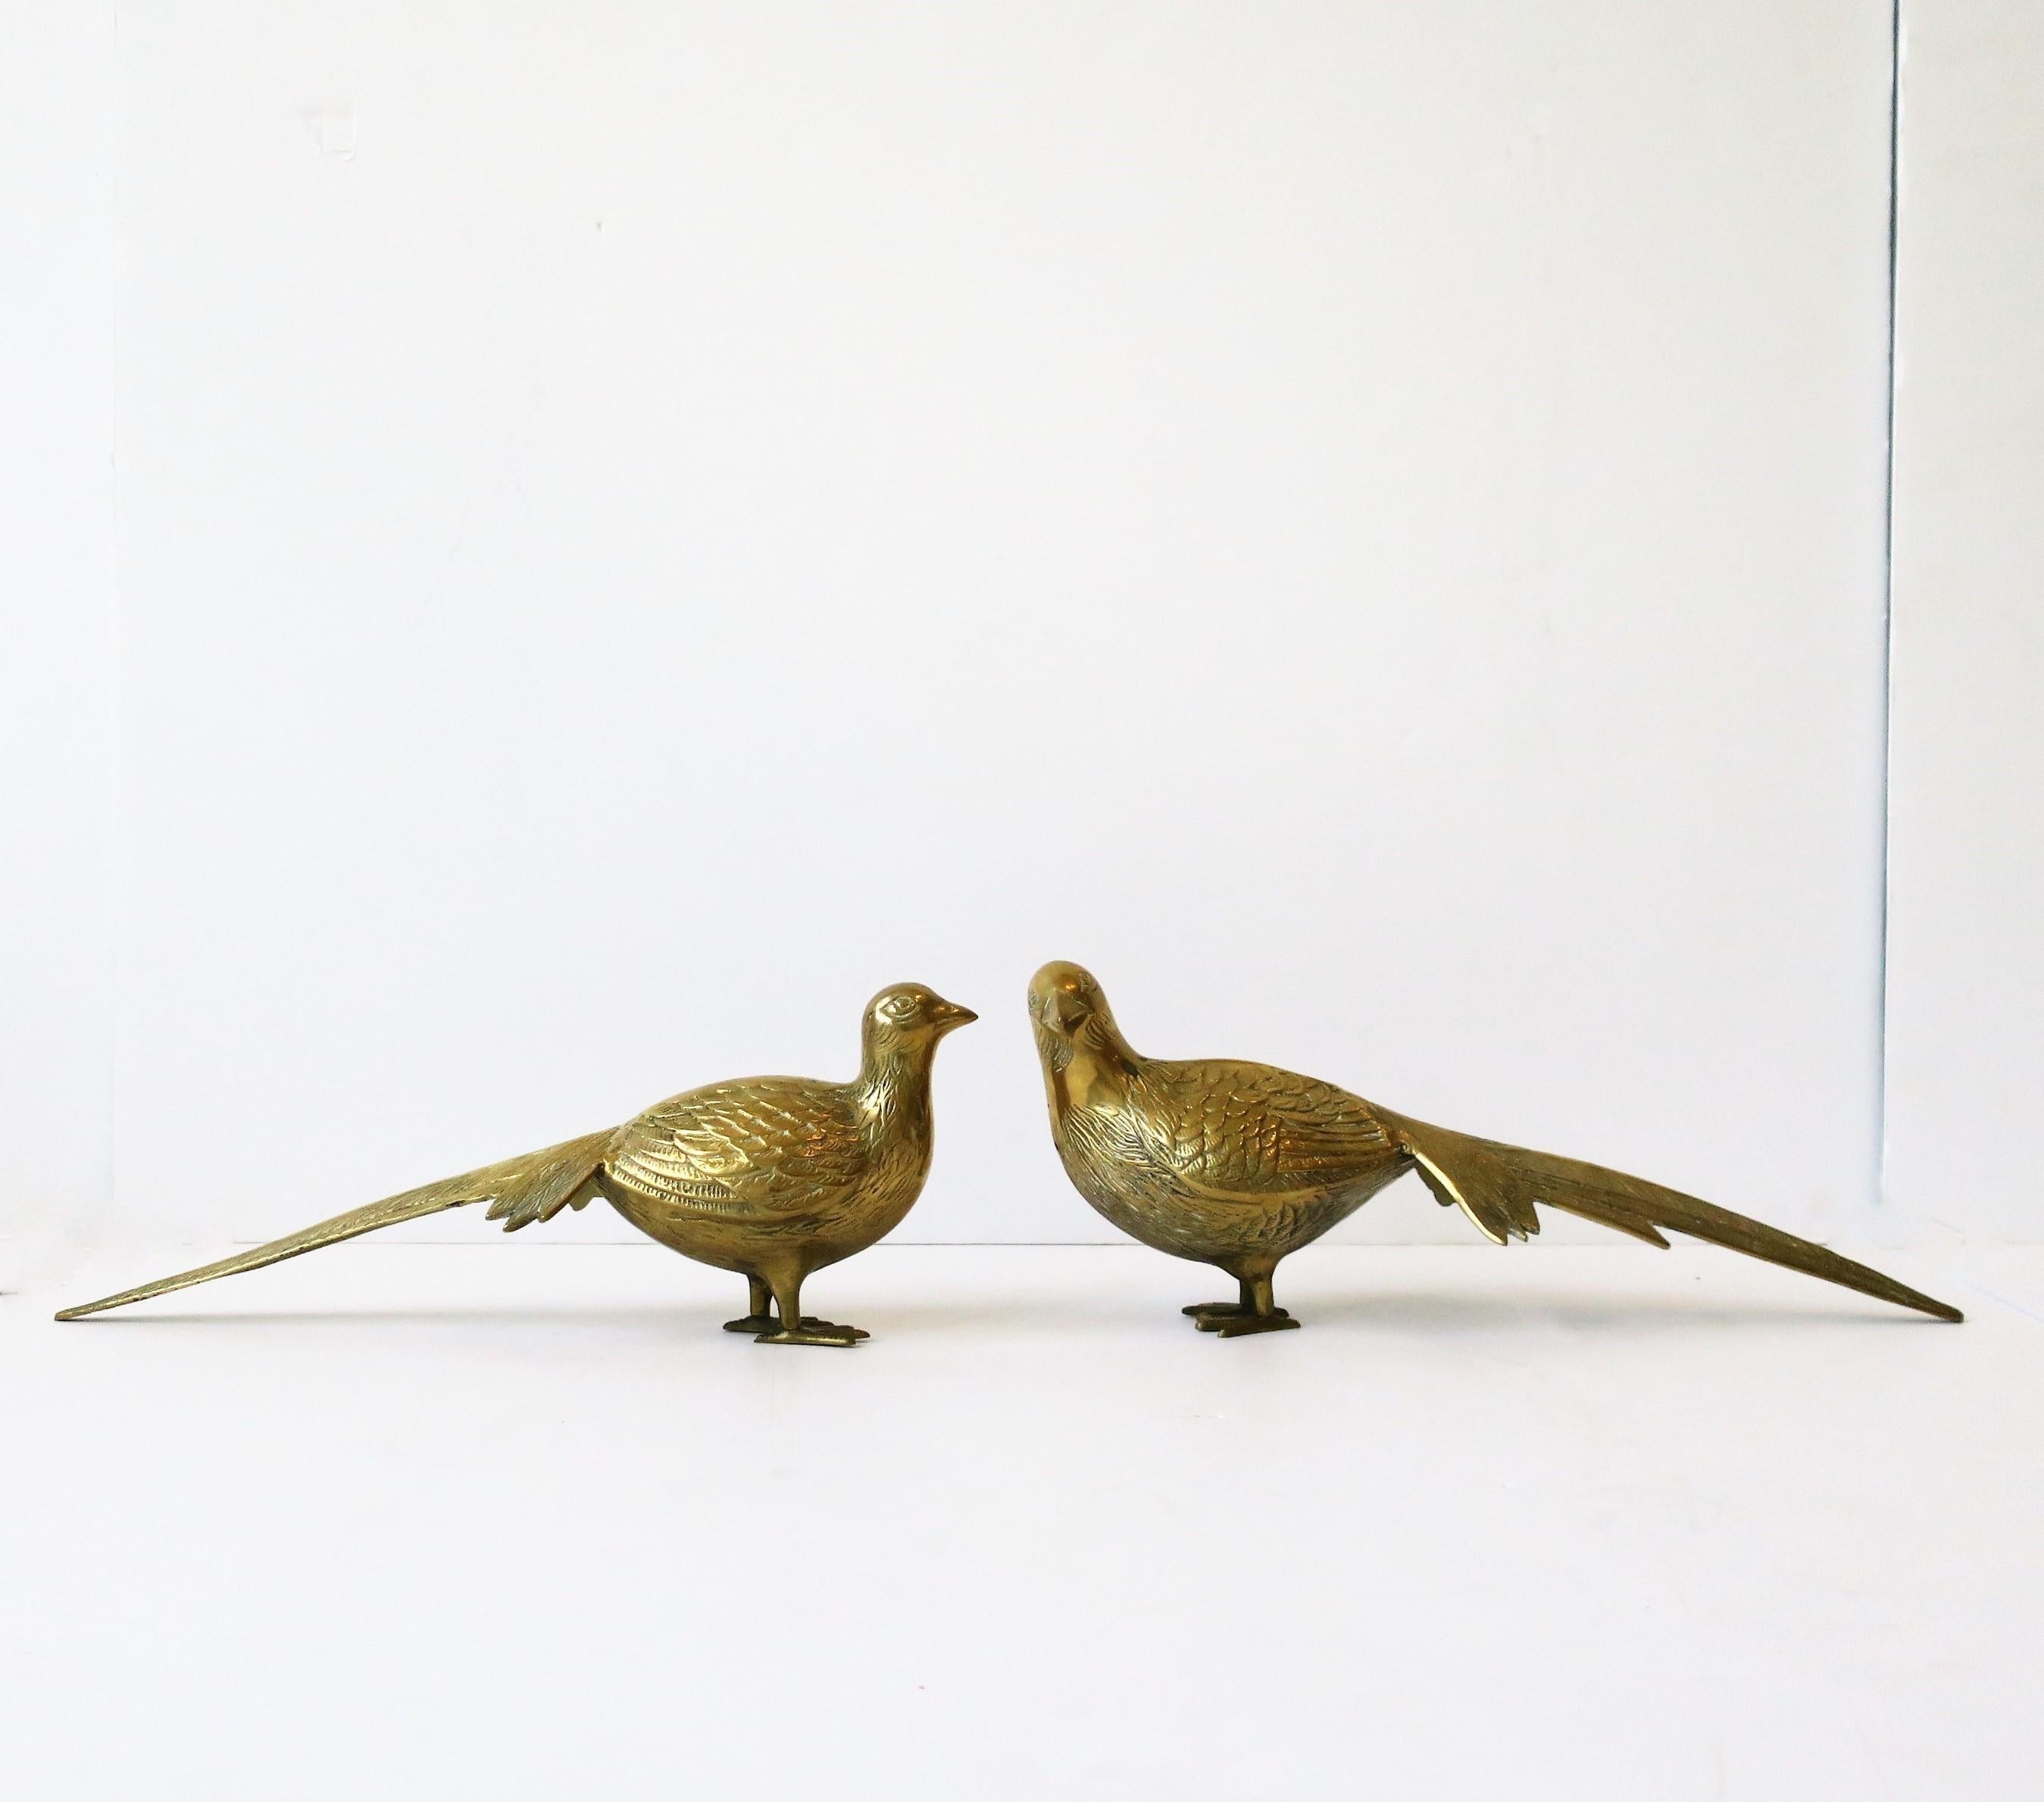 A pair of vintage brass pheasant birds sculptures or decorative objects, circa 1960s. 
Measurements: 6.5